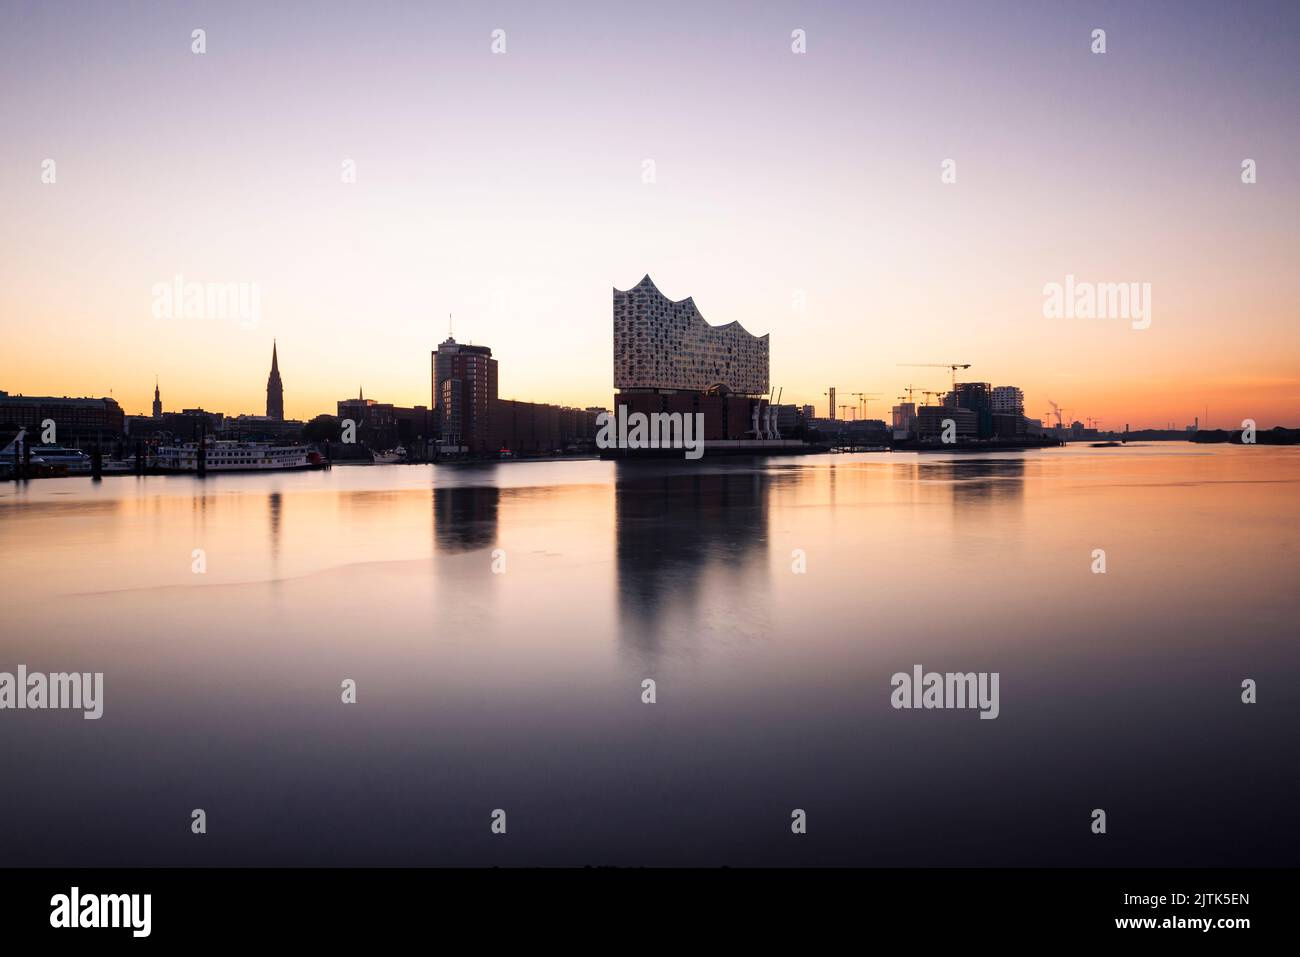 The Elbe Philharmonic Hall and Hamburg skyline reflected in the river Elbe at dawn, Hamburg, Germany Stock Photo